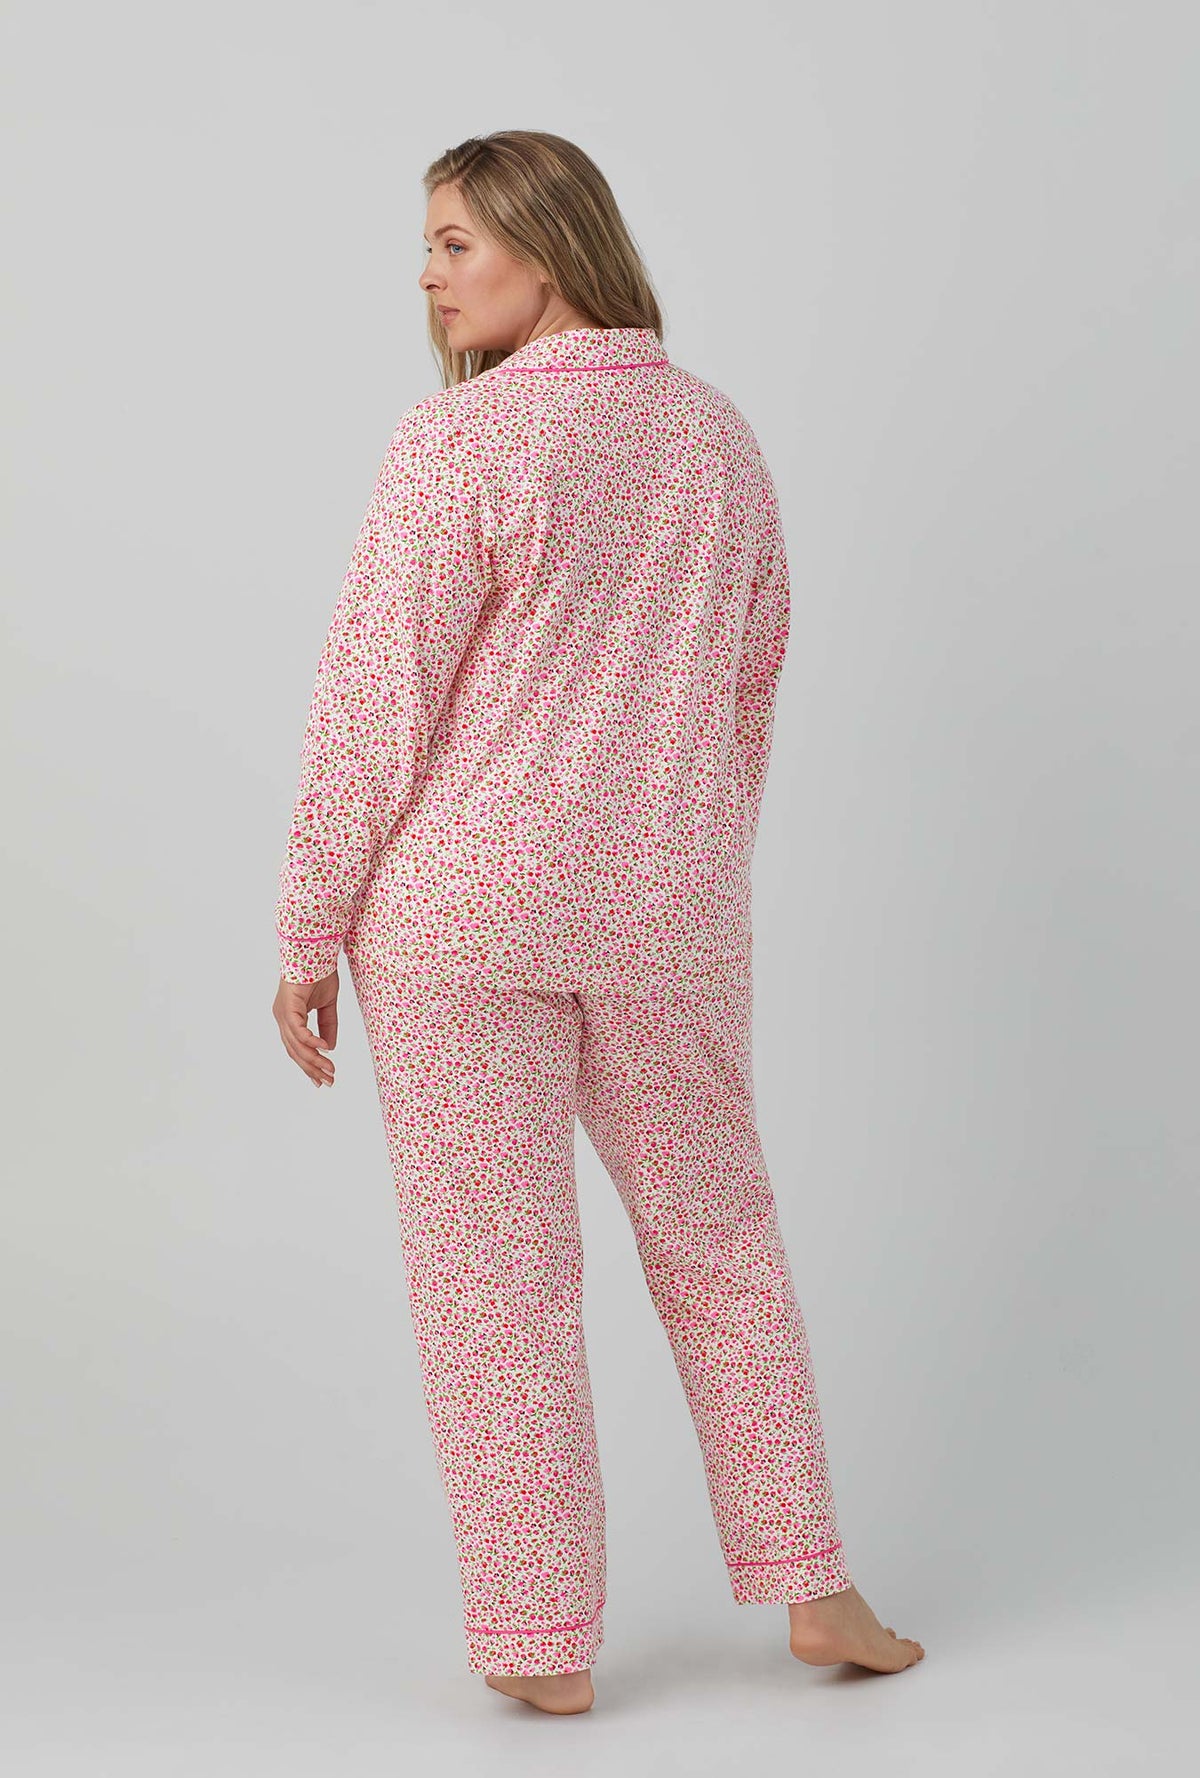 A lady wearing pink Long Sleeve Classic Stretch Jersey PJ Set with Lynn print